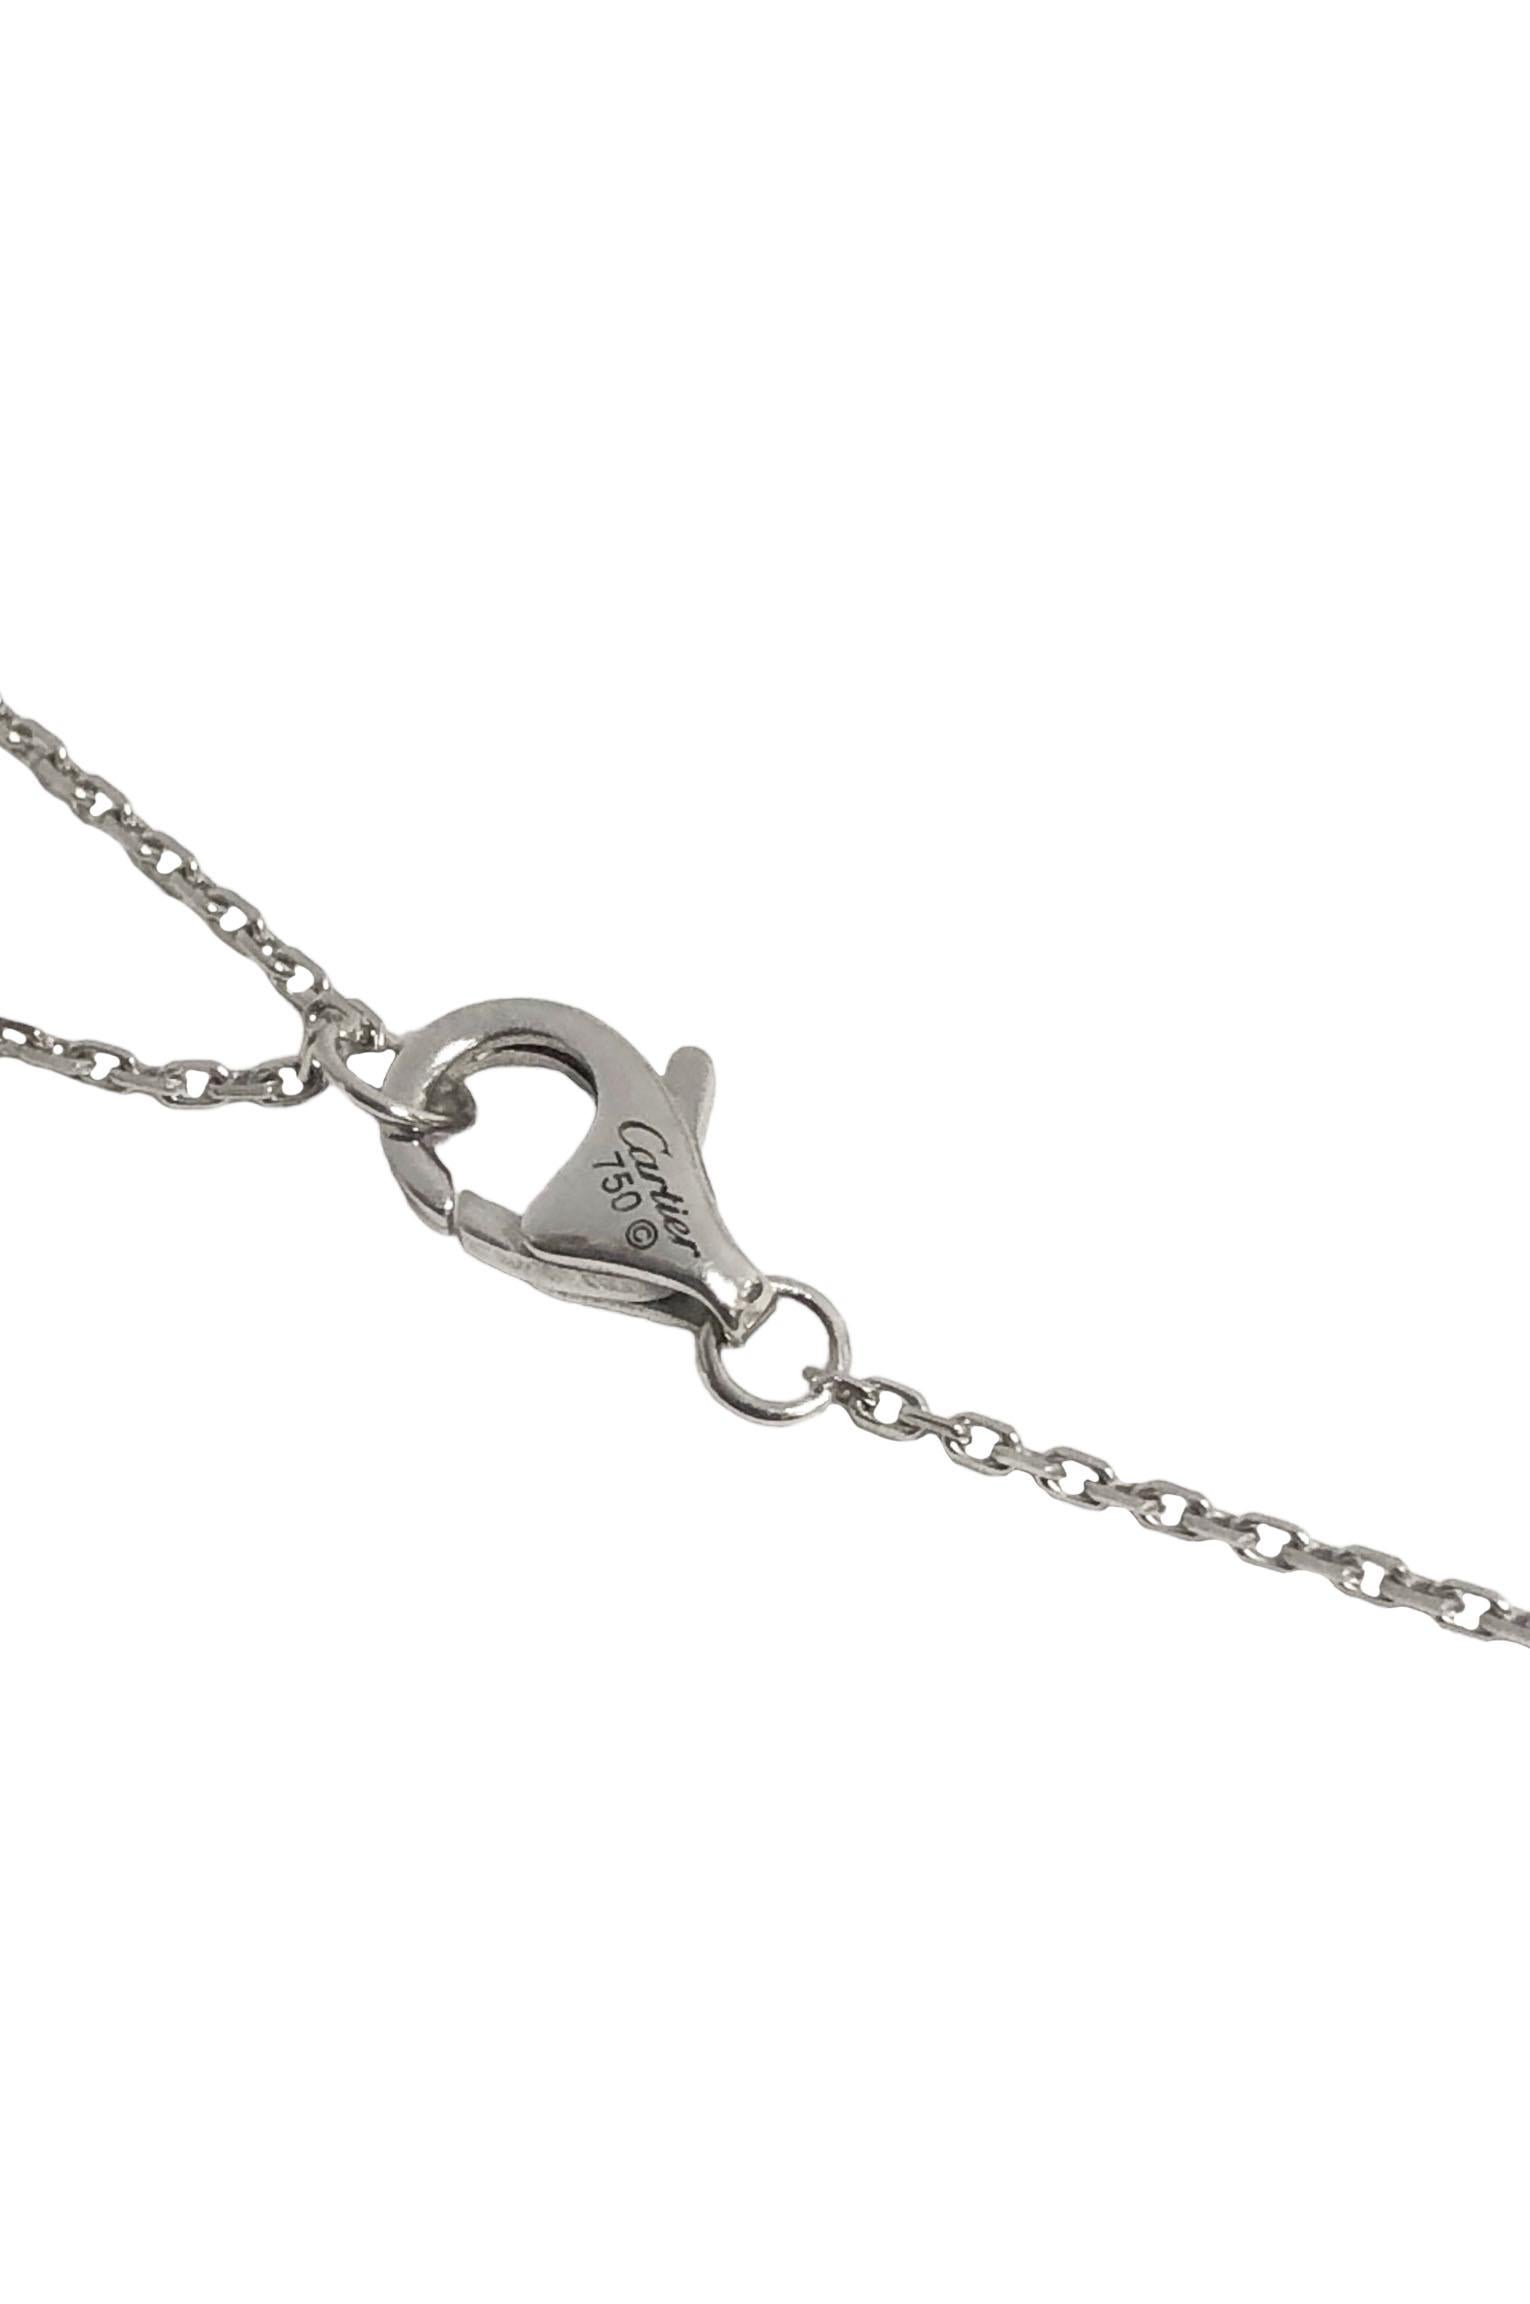 Women's Cartier White Gold and Diamond Pave Heart Pendant necklace